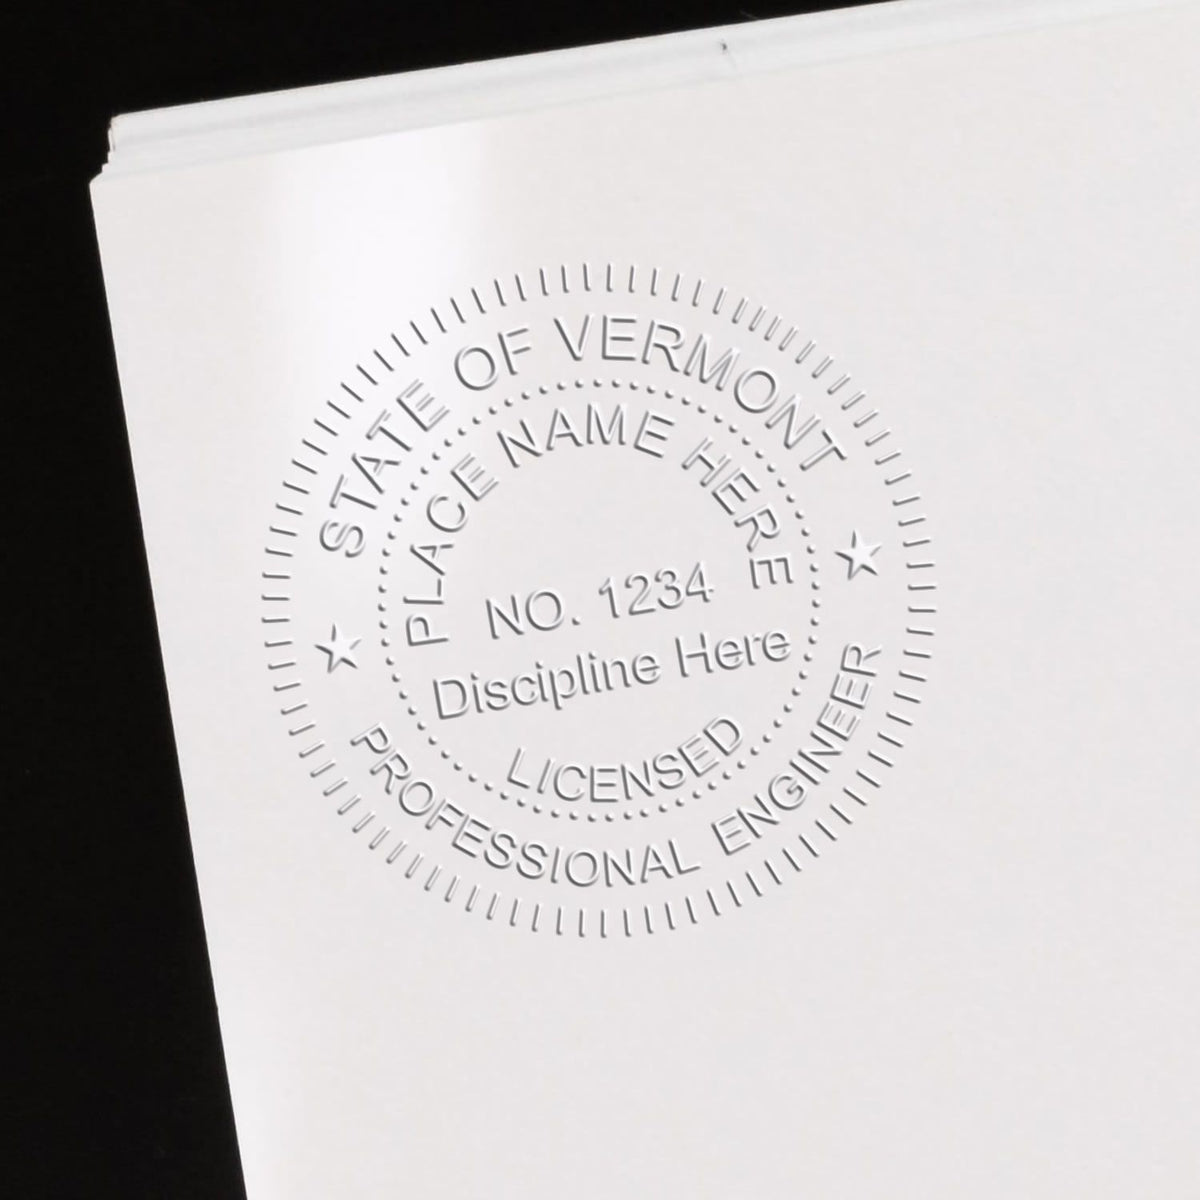 The Heavy Duty Cast Iron Vermont Engineer Seal Embosser stamp impression comes to life with a crisp, detailed photo on paper - showcasing true professional quality.